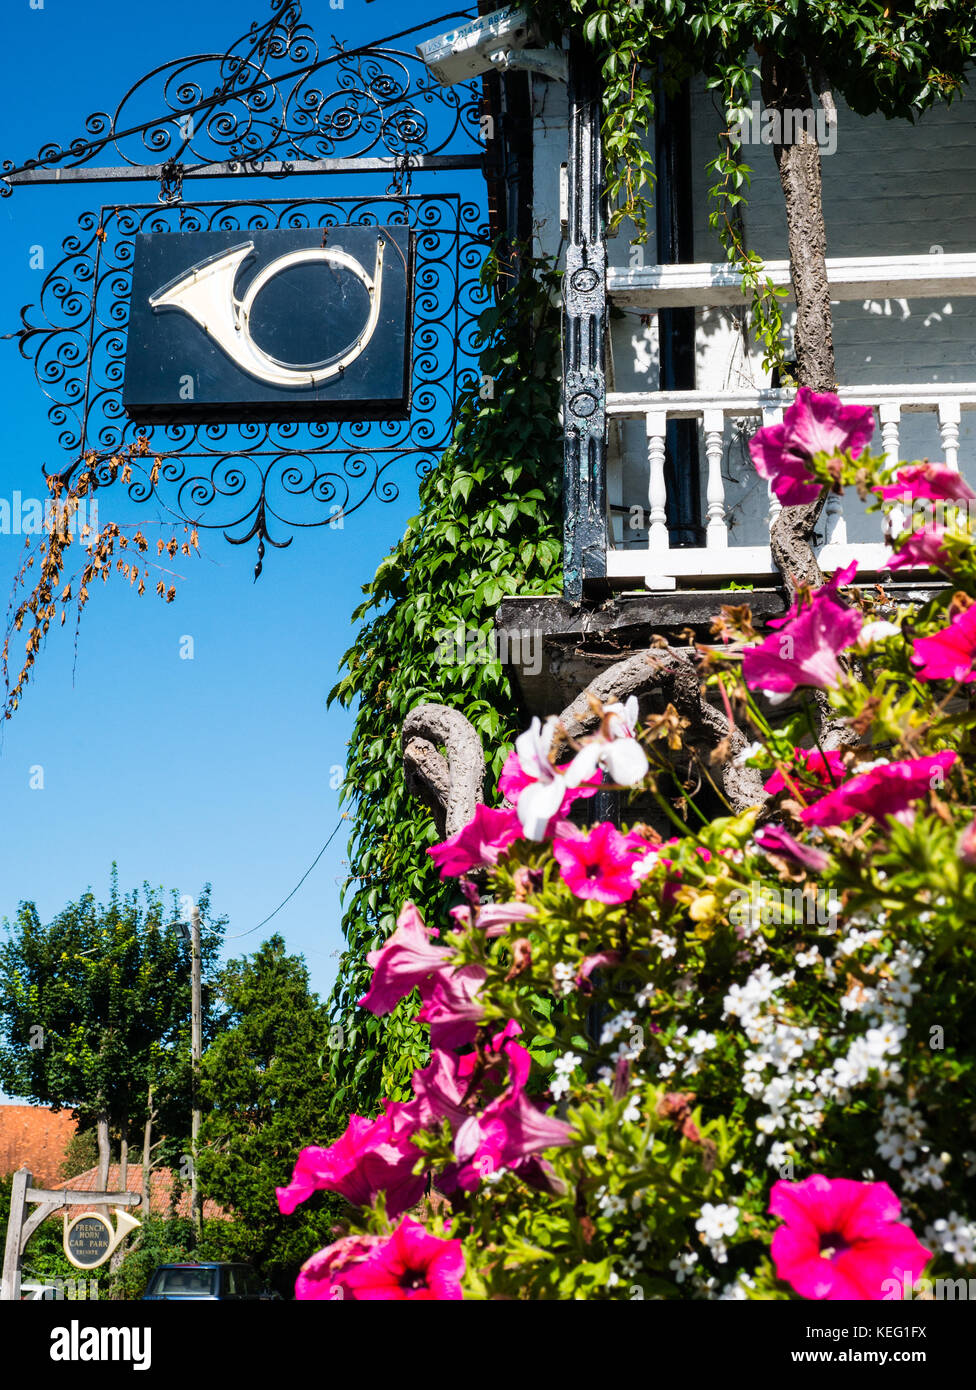 The French Horn Luxury Hotel, Sonning-on-Thames, Sonning Eye, Oxfordshire, Angleterre, ROYAUME-UNI, GB. Banque D'Images